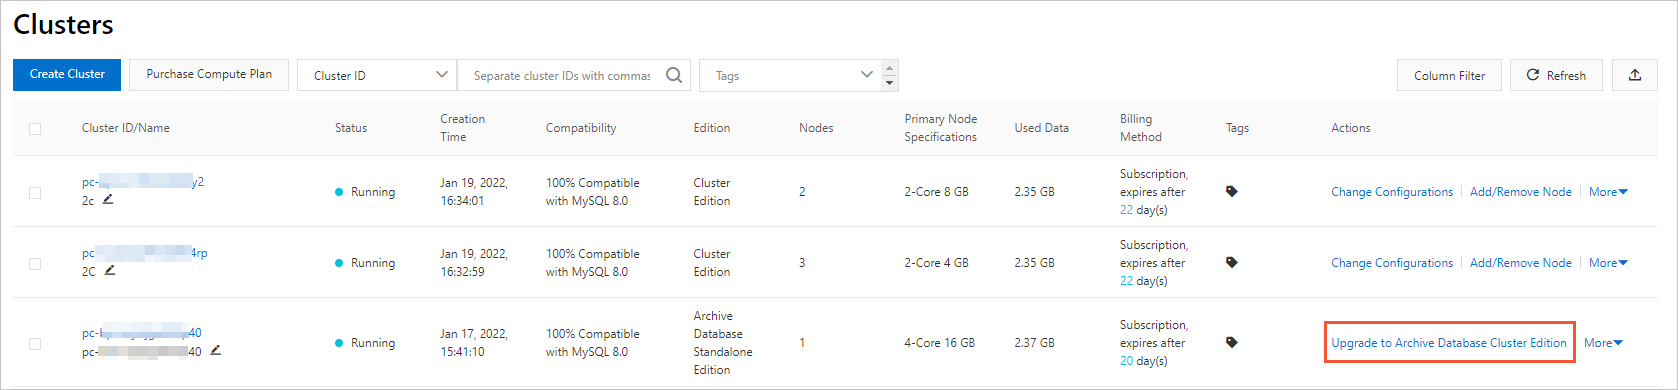 Upgrade to Archive Database Cluster Edition